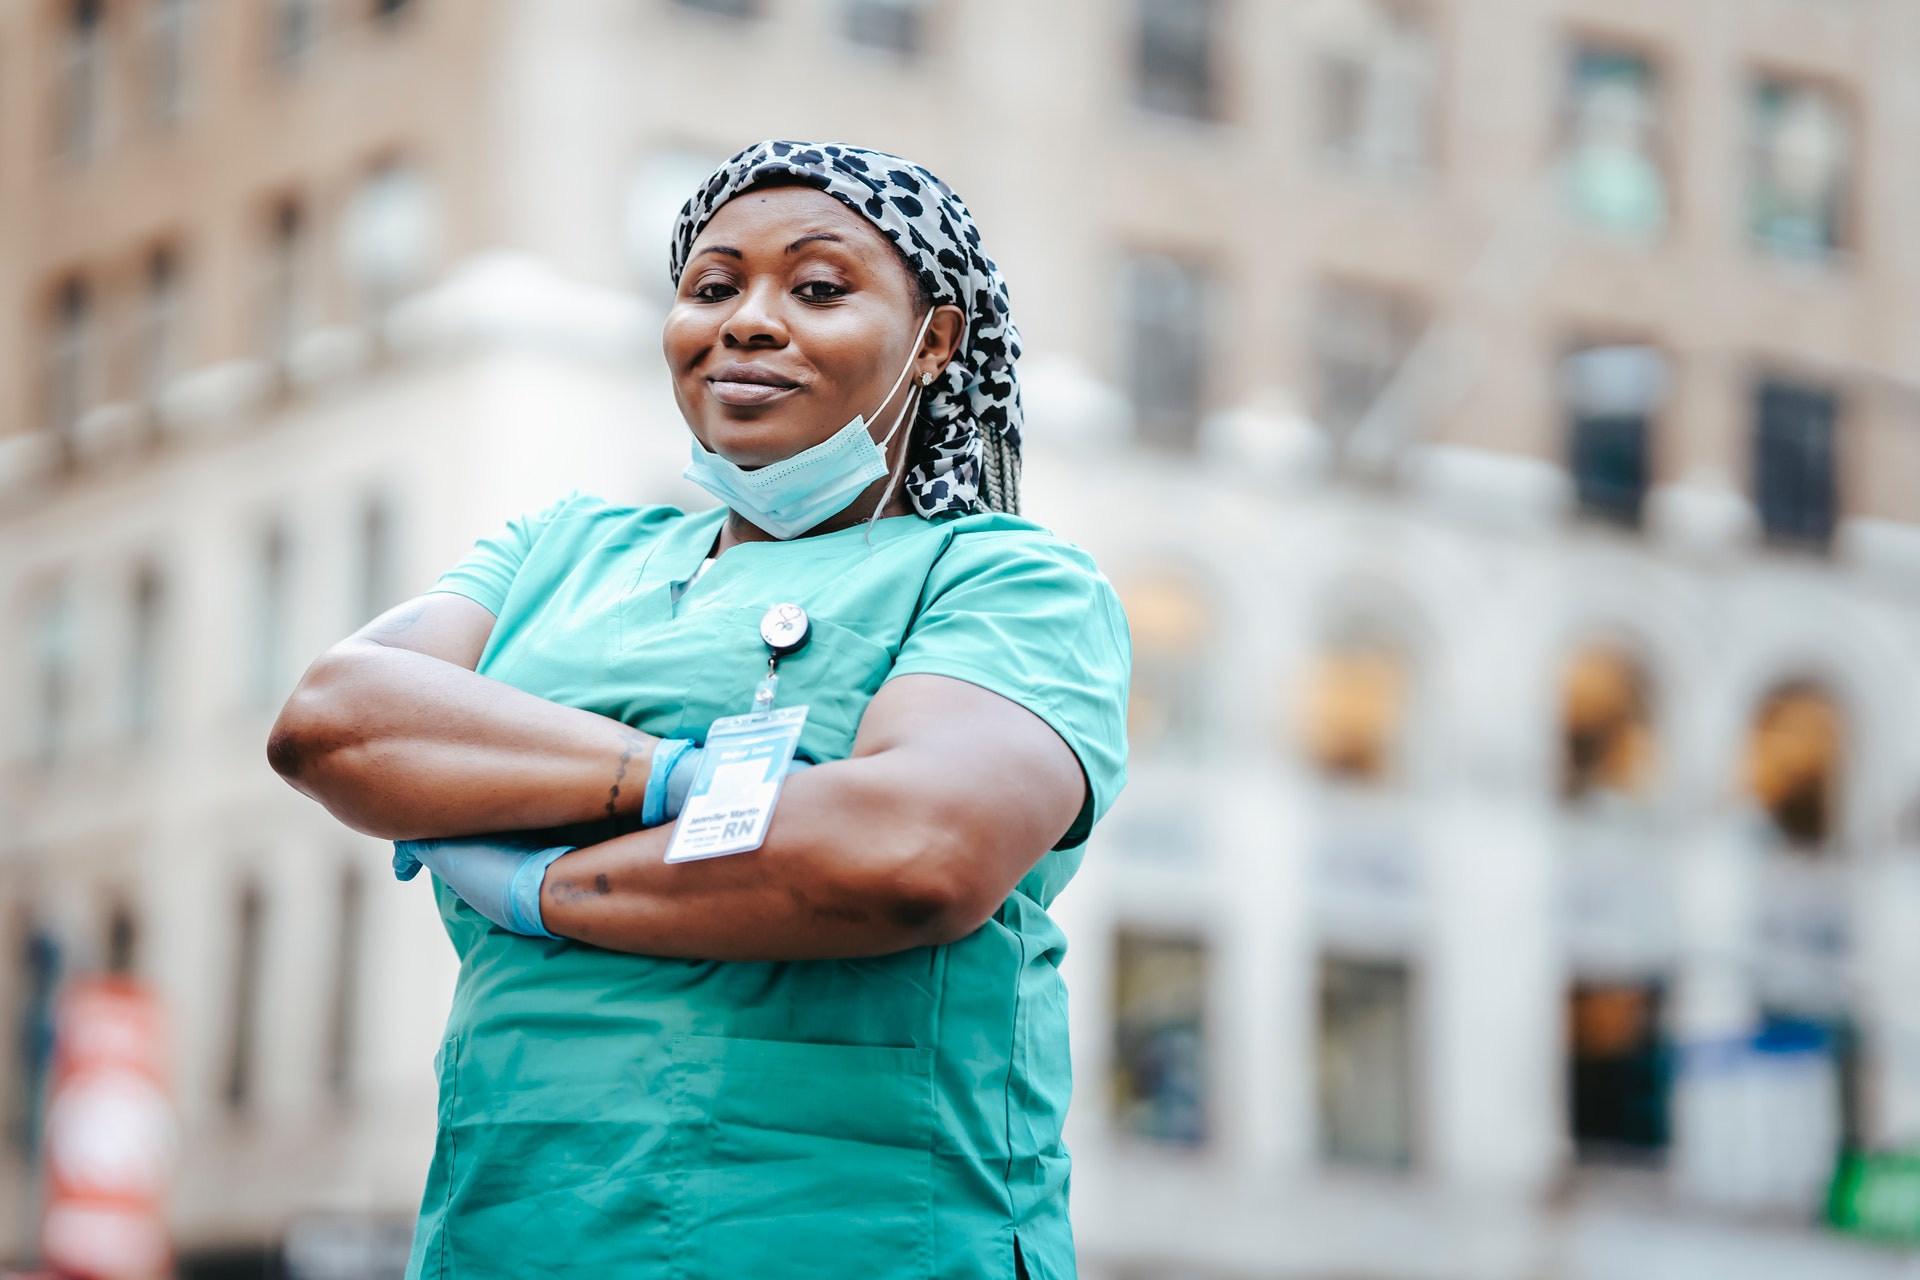 How To Tell If You’re Ready To Advance In Your Nursing Career